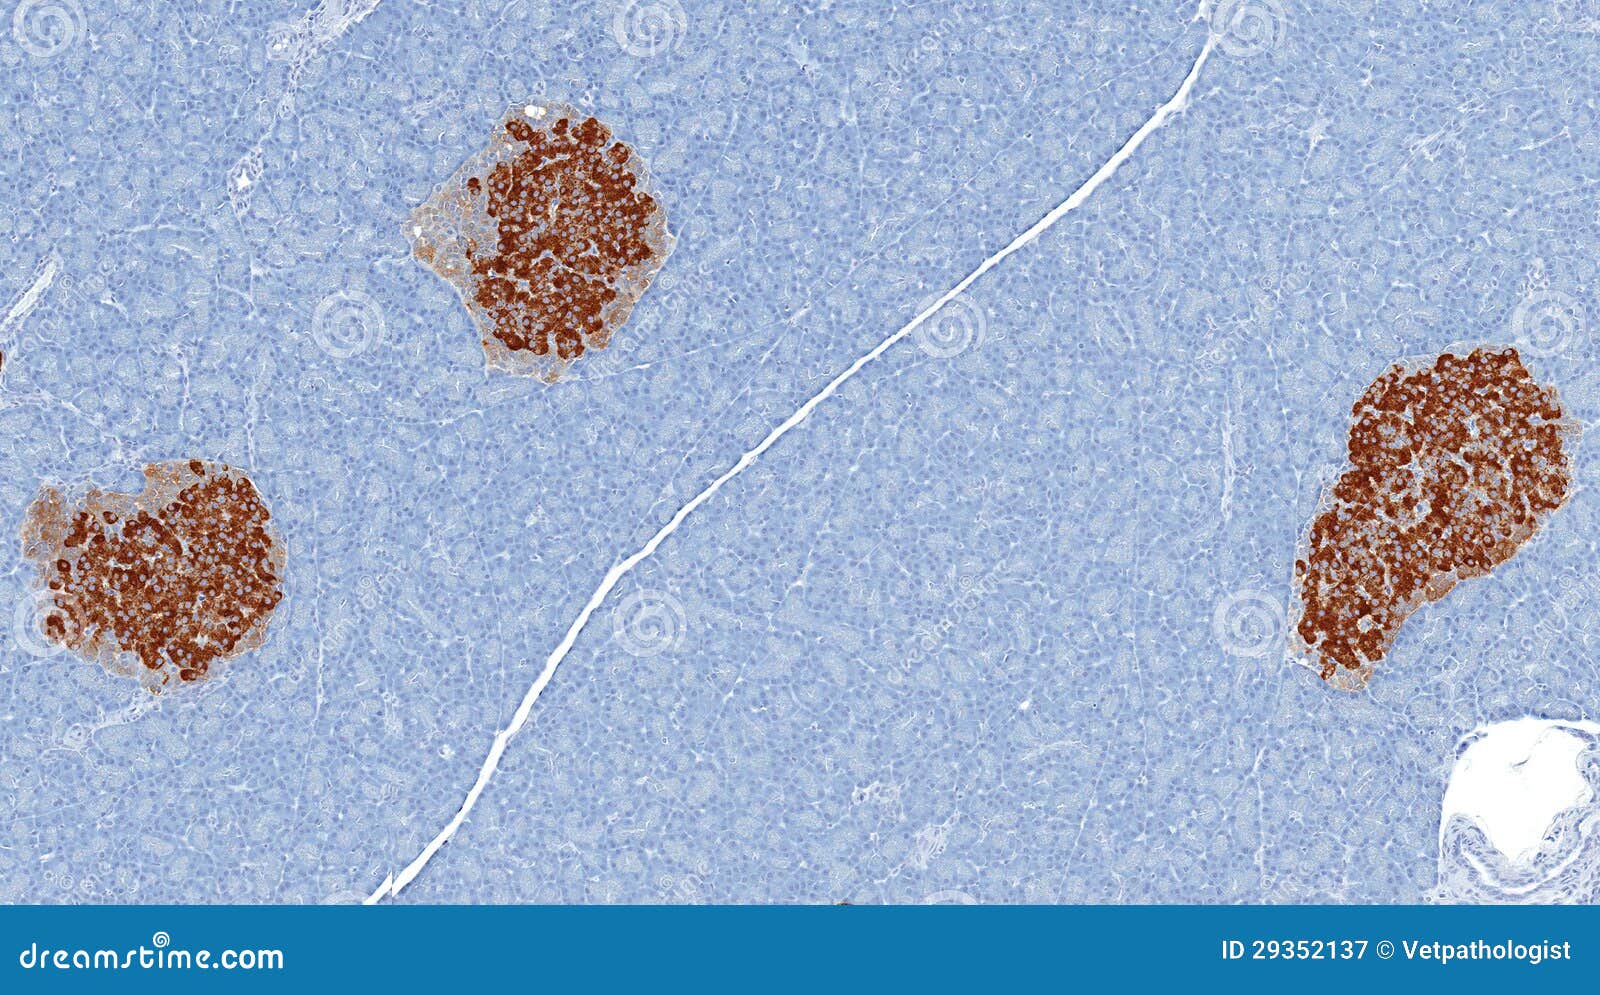 islets of langerhans stained brown for insulin